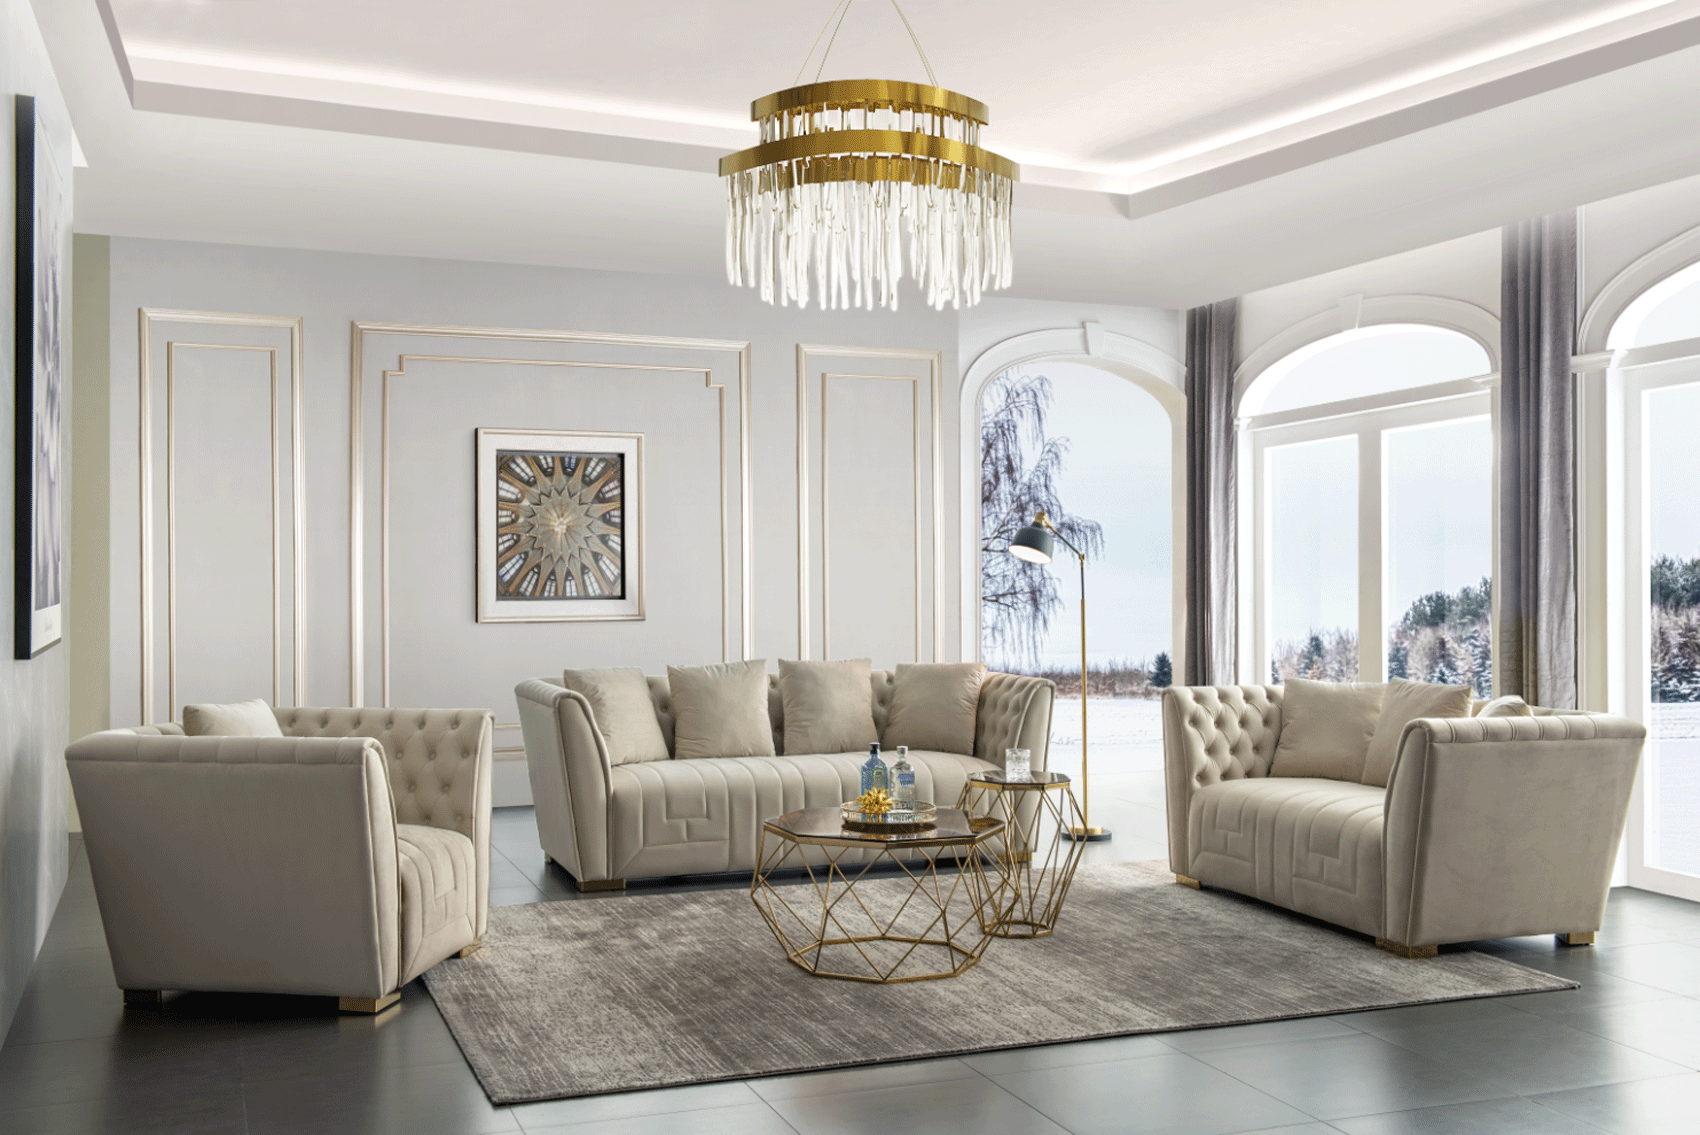 Living Room Furniture Sleepers Sofas Loveseats and Chairs PM15 LIVING ROOM SET BEIGE FABRIC